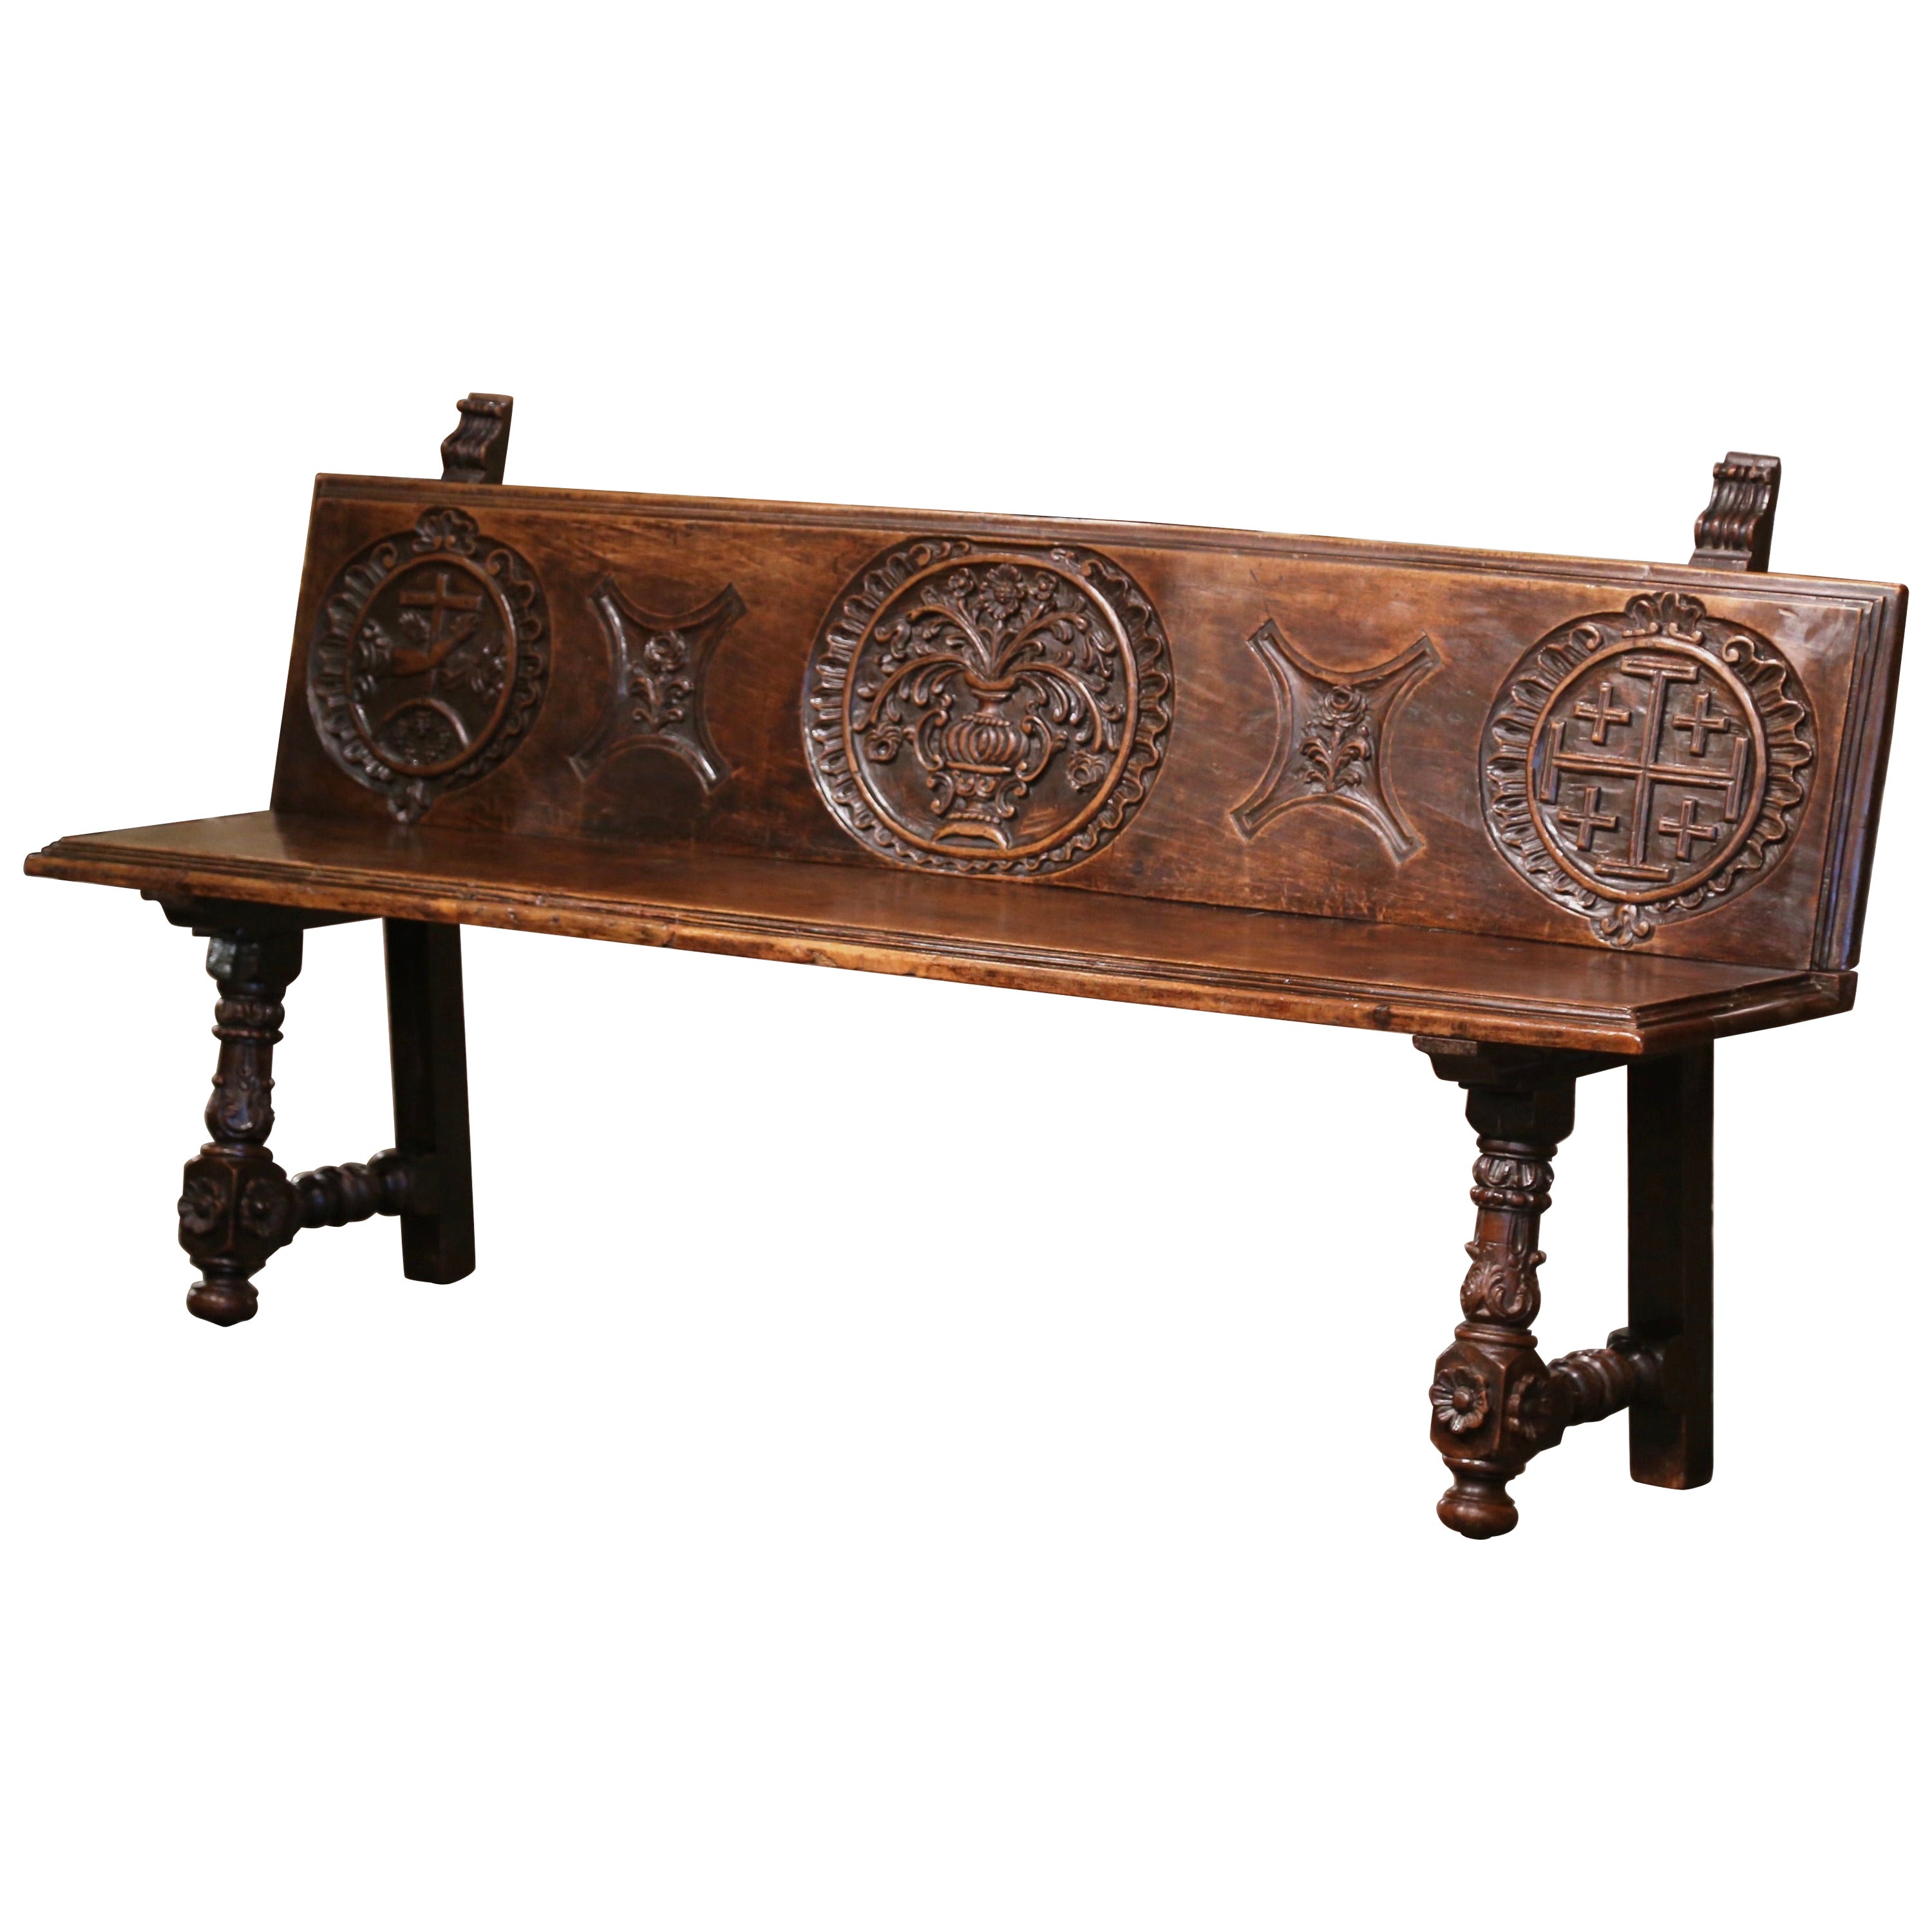 18th Century Spanish Baroque Carved Walnut Bench from The Pyrenees